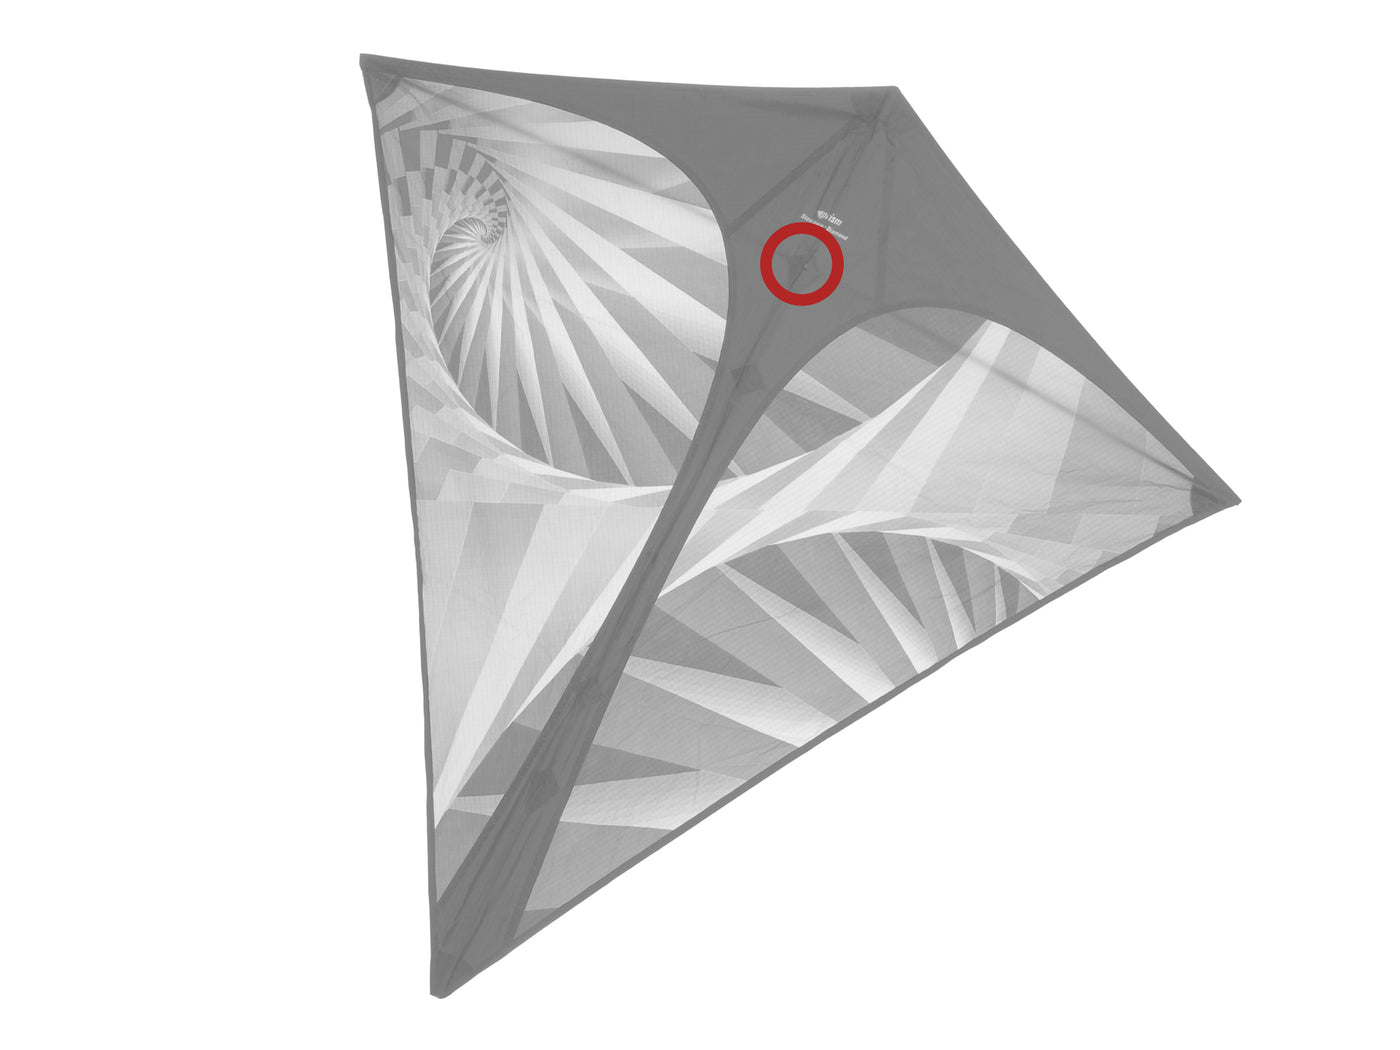 Diagram showing location of the Stowaway Diamond Center T on the kite.